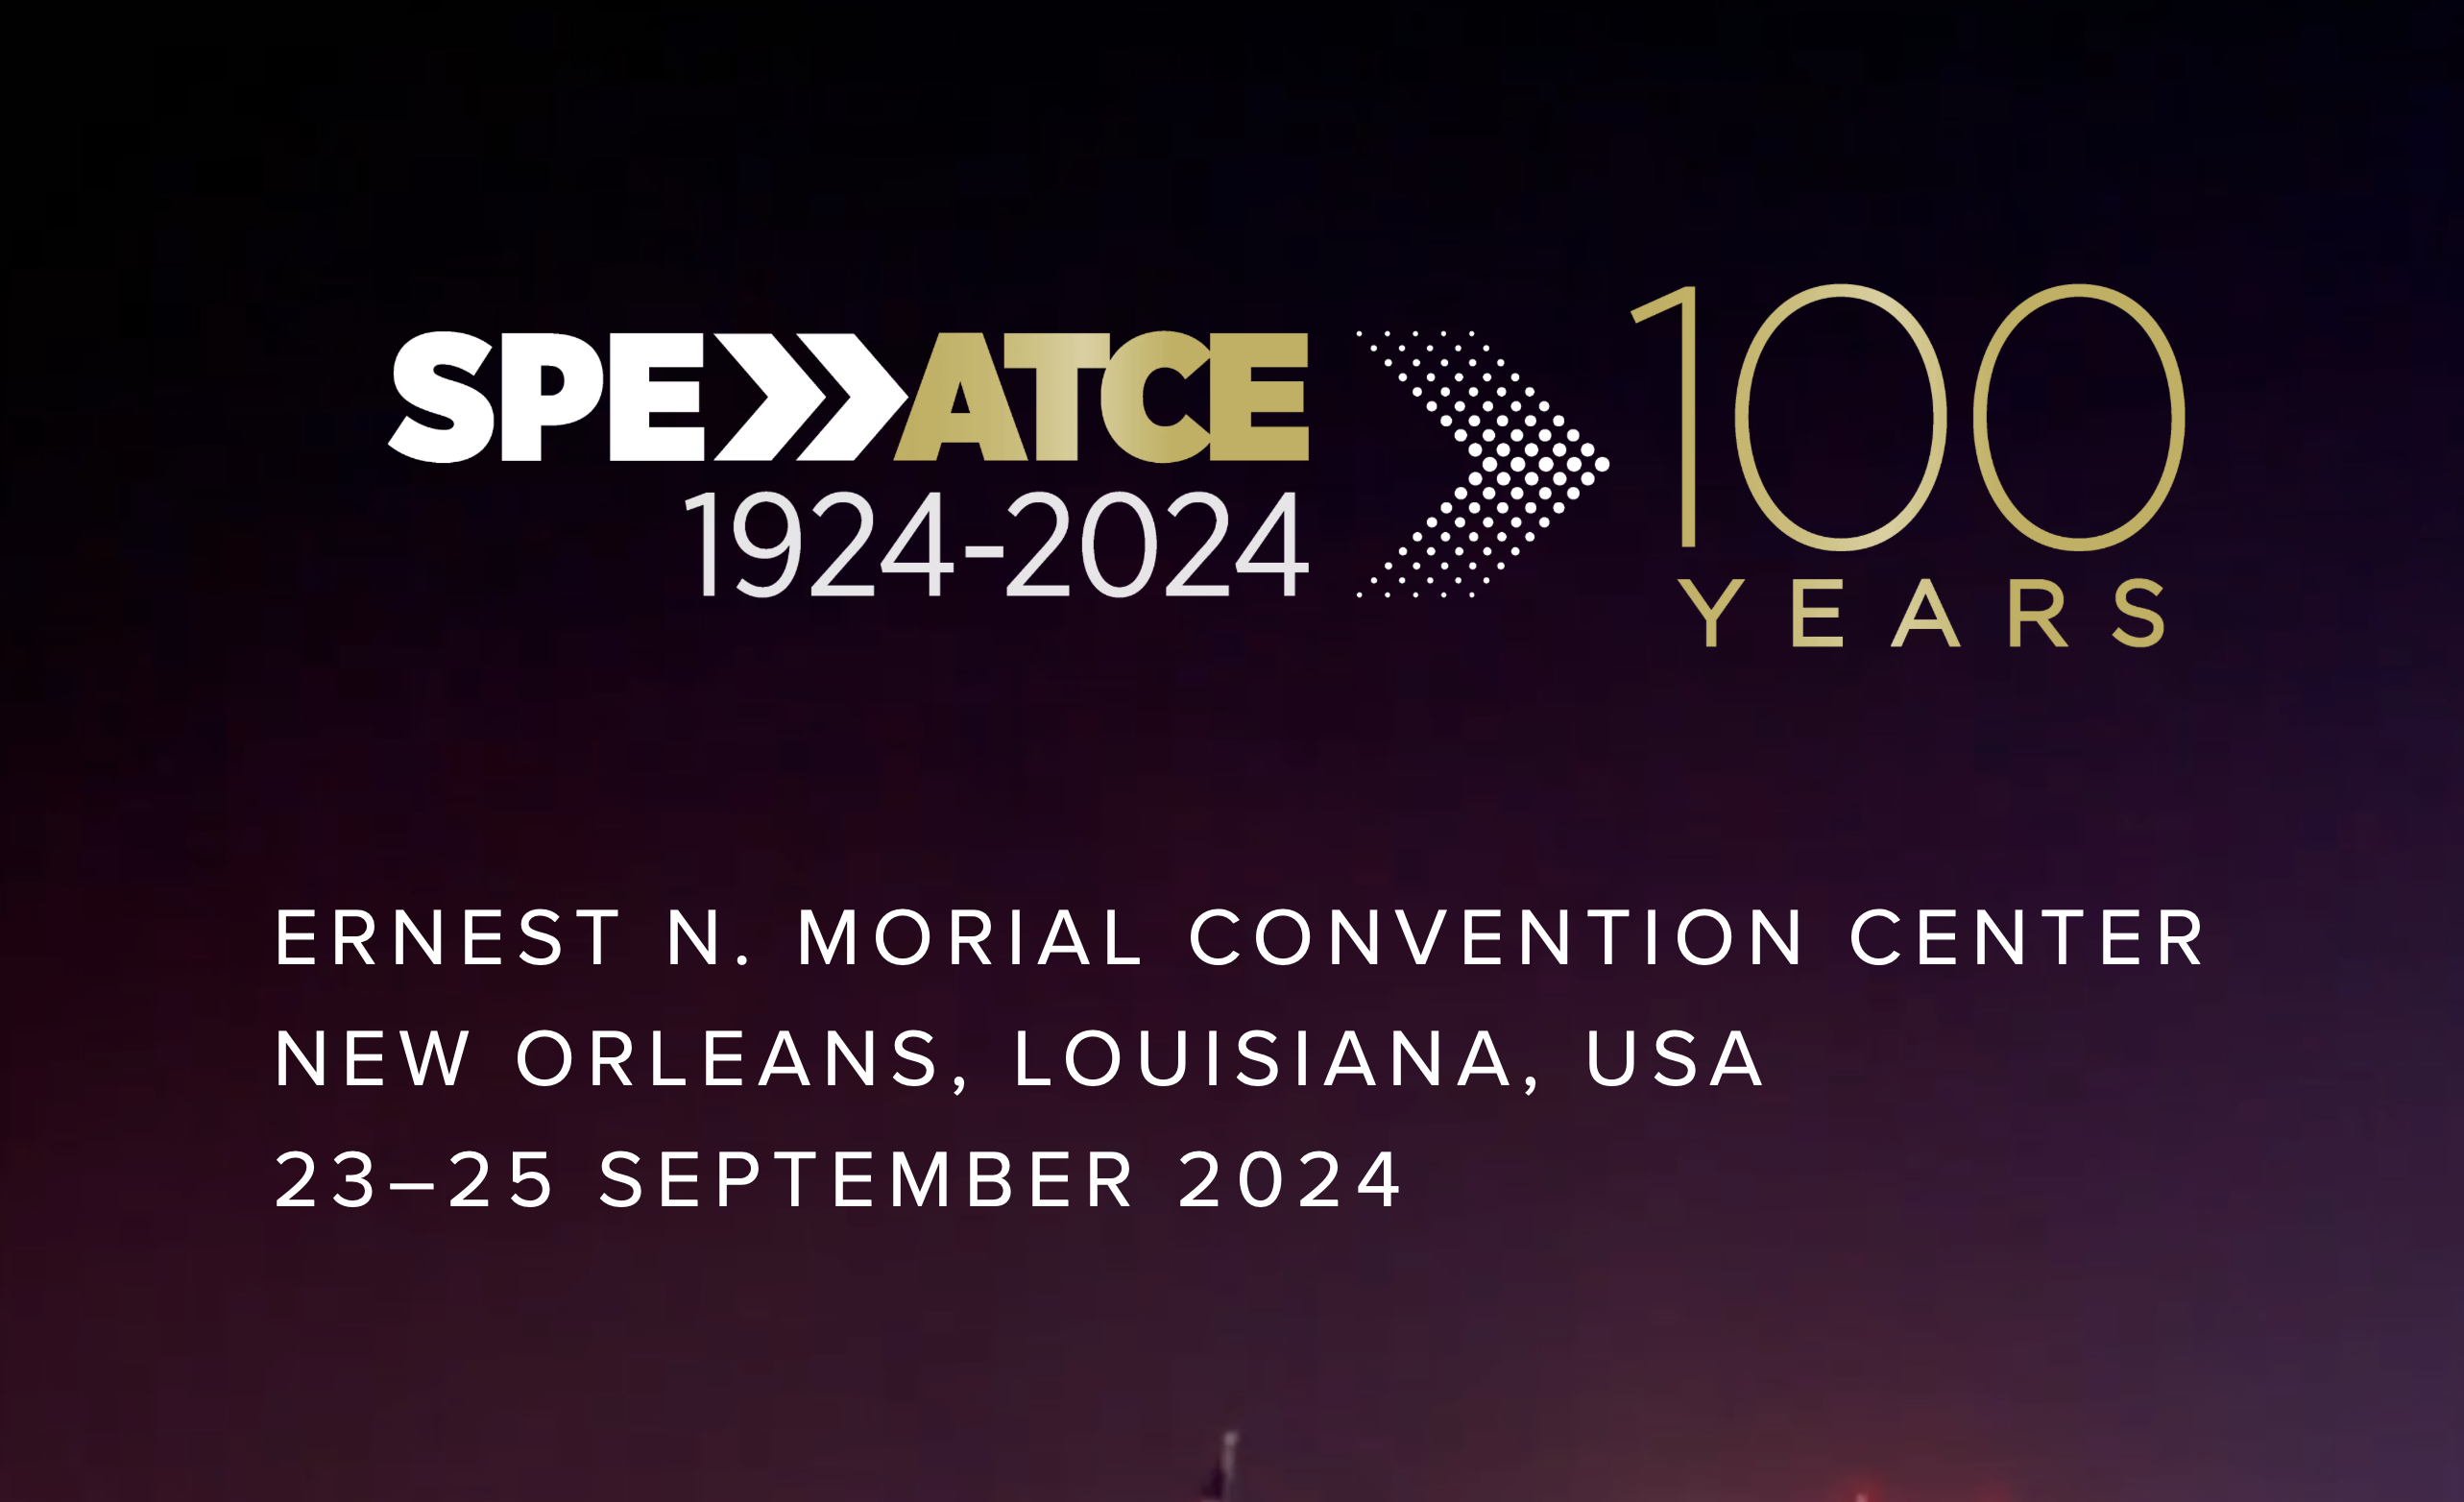 SPE ATCE 2024 - 100 Years*